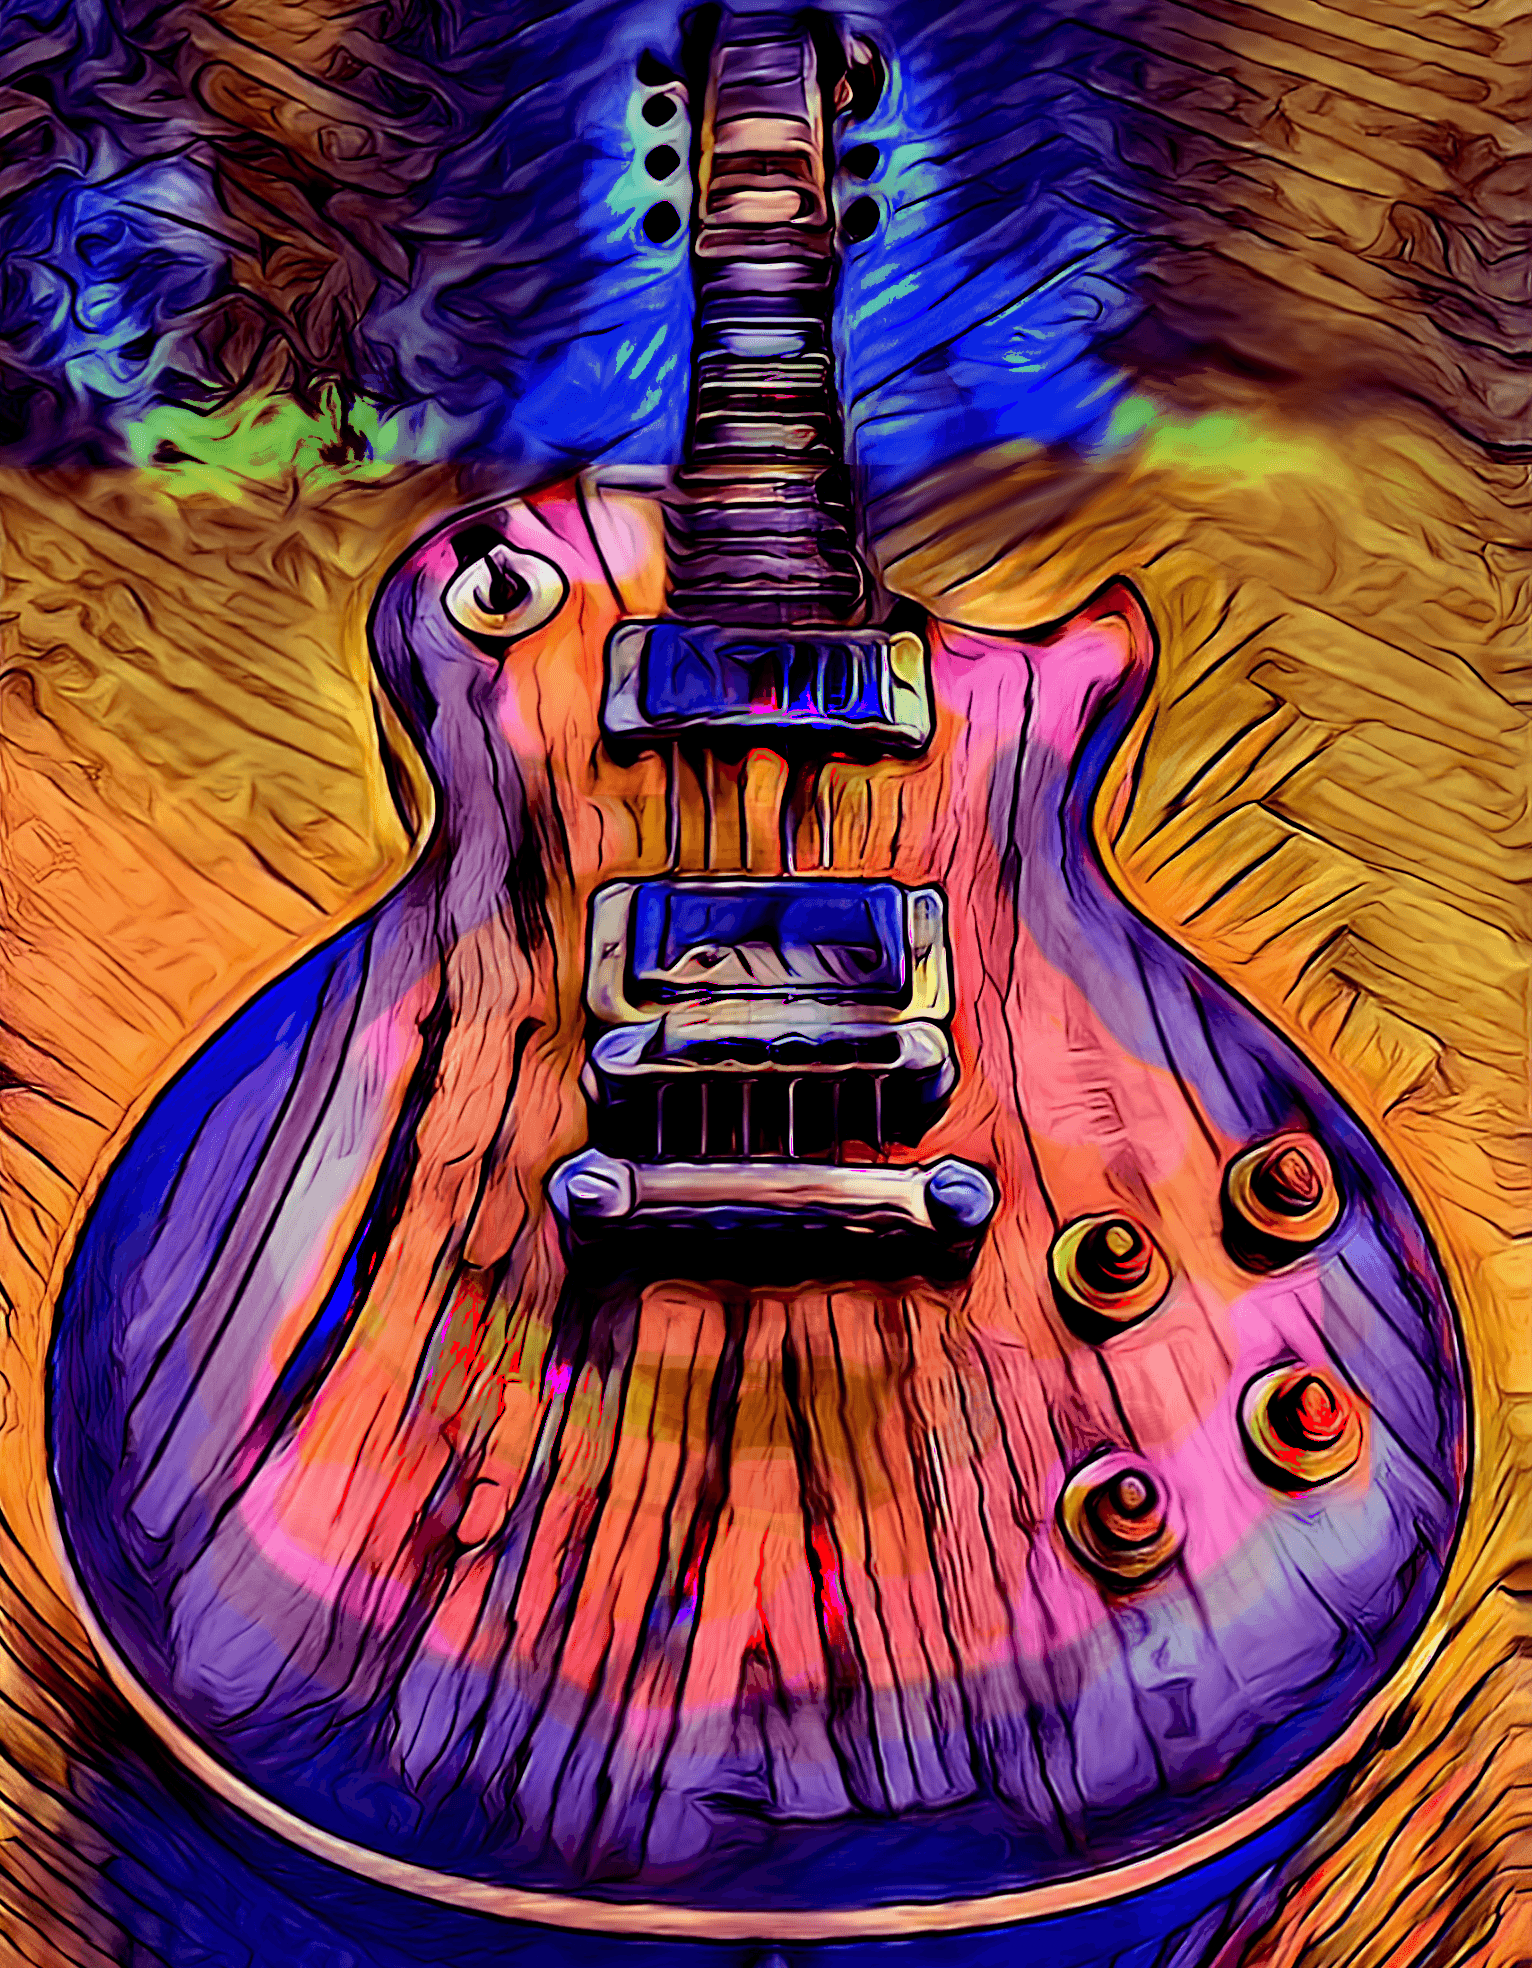 Gibson Les Paul LSD "If Music were Colors, and Paintings were Songs" by: duhpez